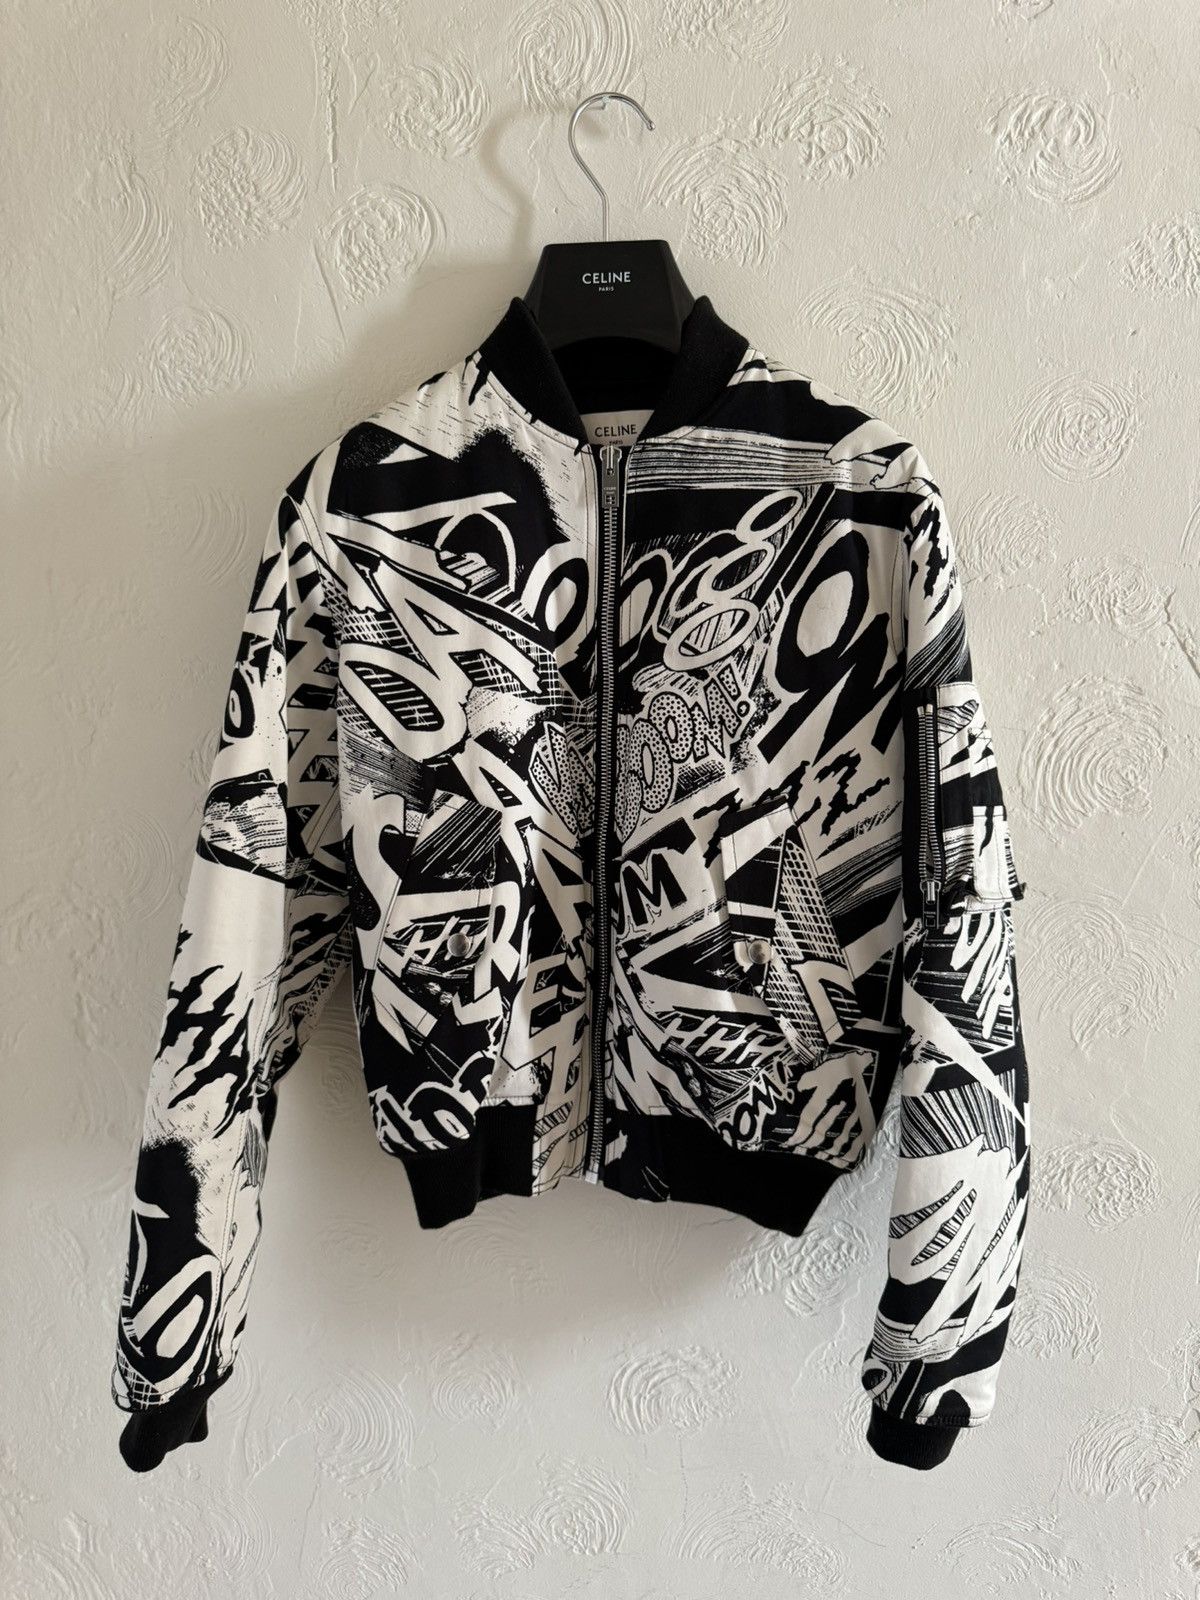 image of Celine Ss19 Marclay Cotton Twill Bomber Jacket Xs in Black White, Men's (Size Small)